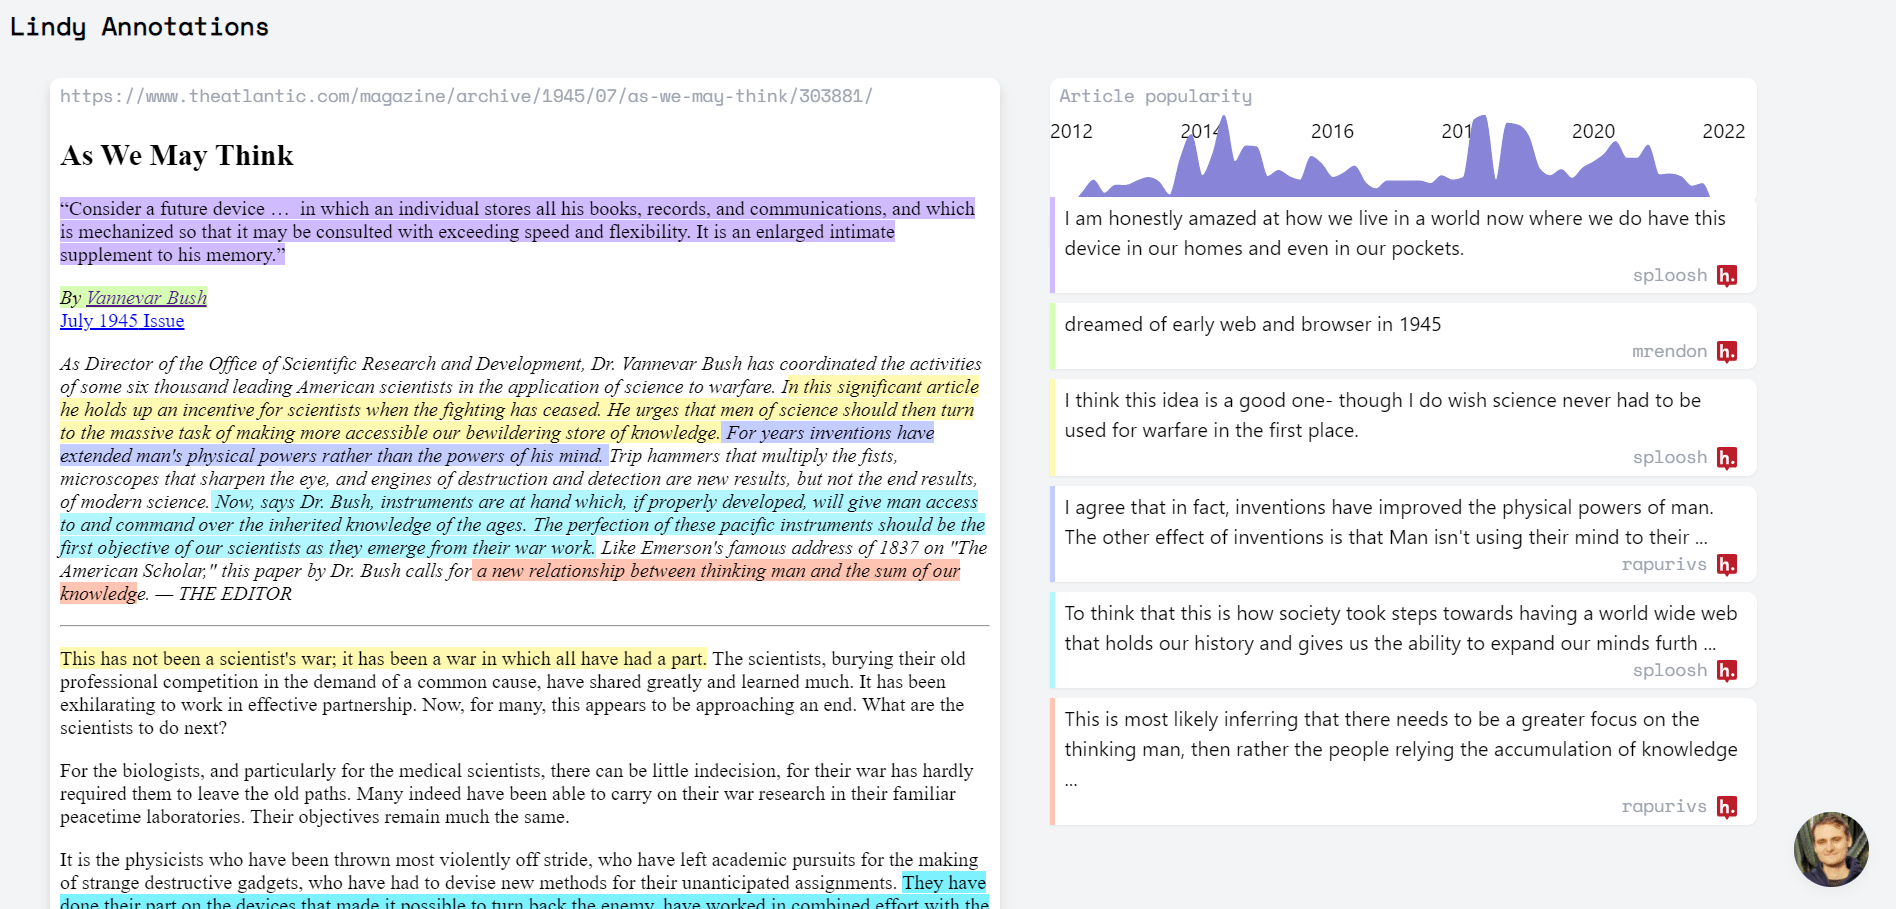 Alternate Hypothes.is UI featuring the Atlantic article As We May Think with rainbow colored highlights on one side and annotations to the right. At the top is a graph of the article's popularity showing the number of annotations over time.